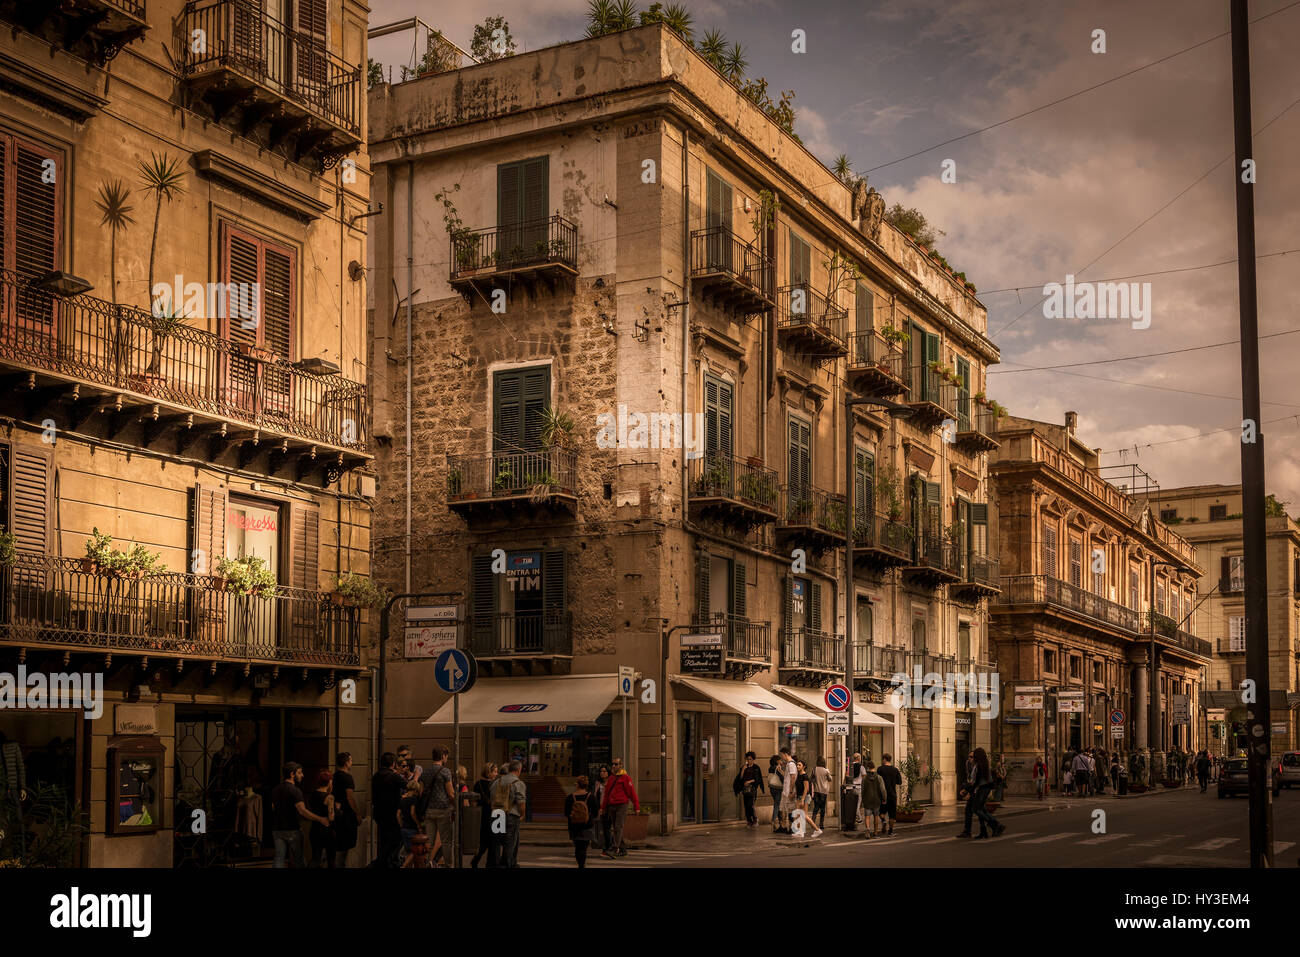 Italy, Sicily, Palermo, Old residential buildings in city center Stock Photo